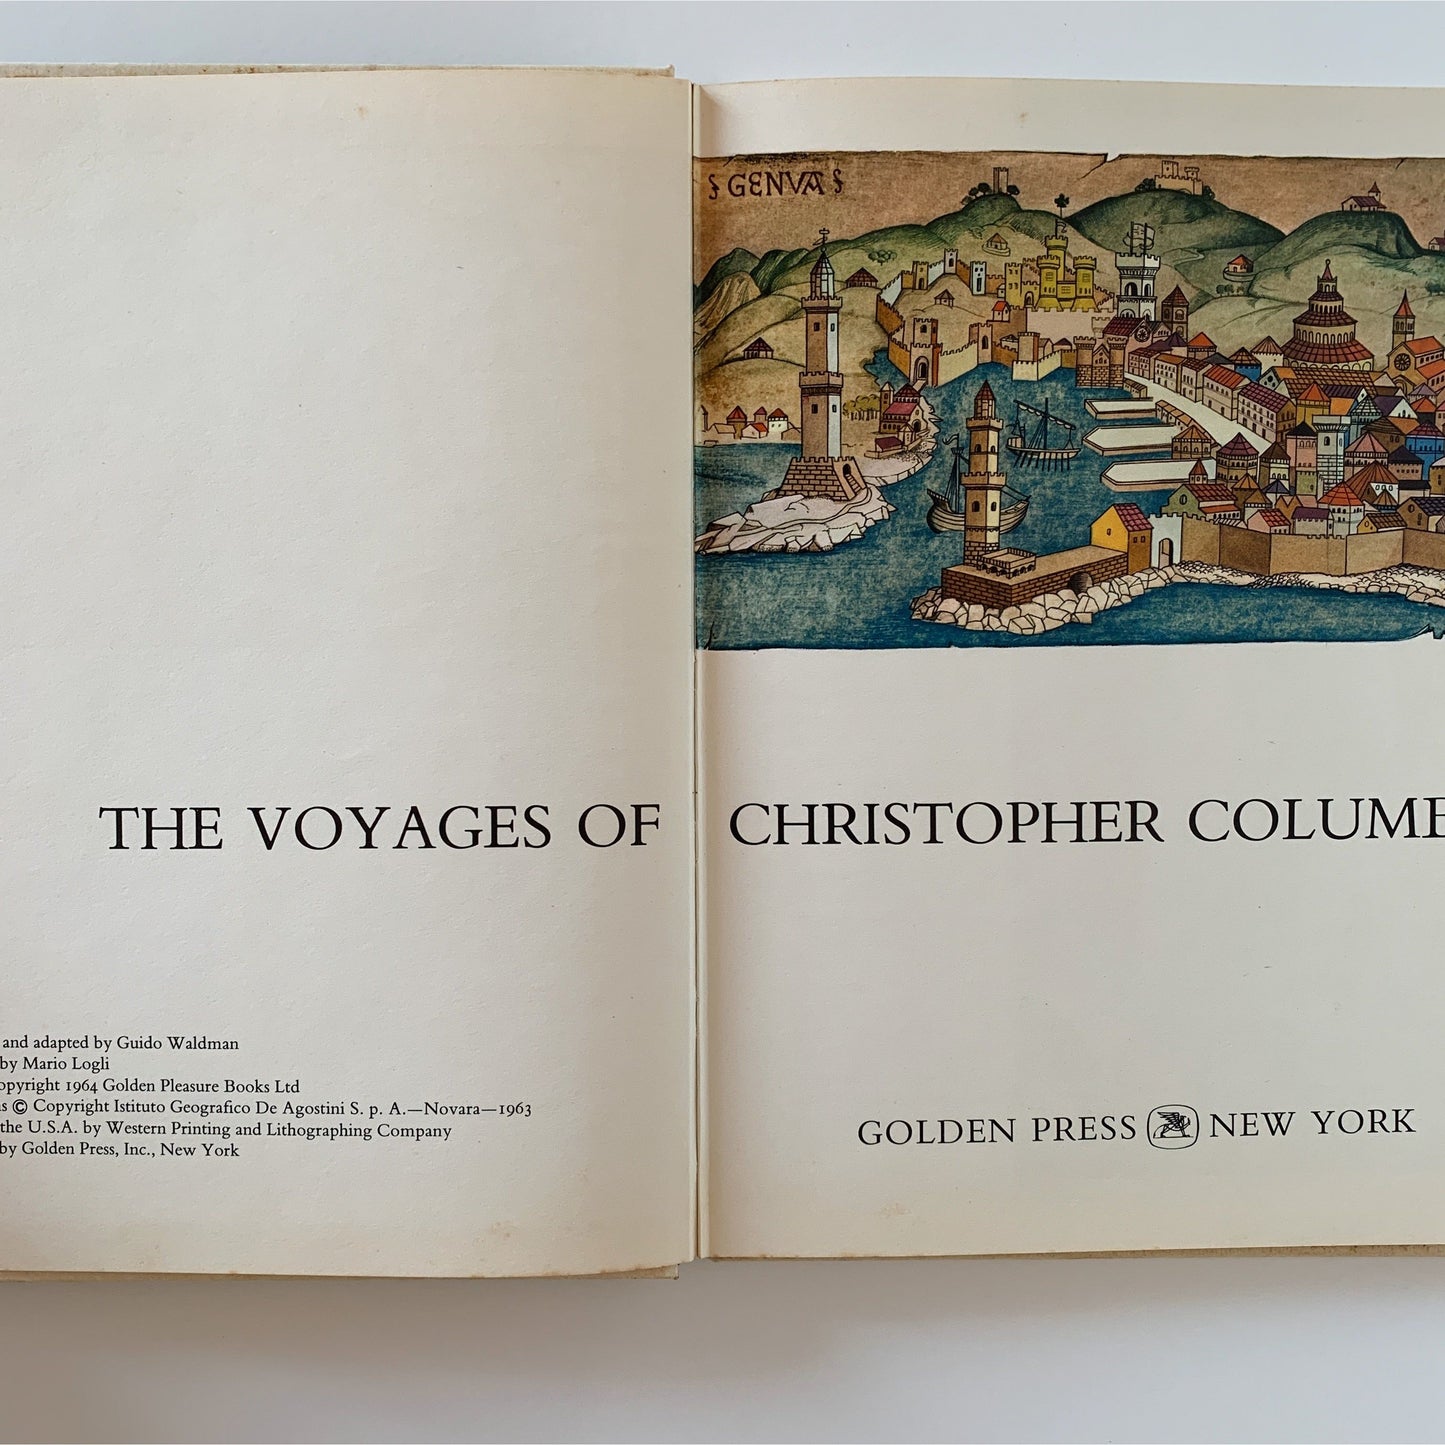 The Voyages of Christopher Columbus, 1964 Golden Press Hardcover